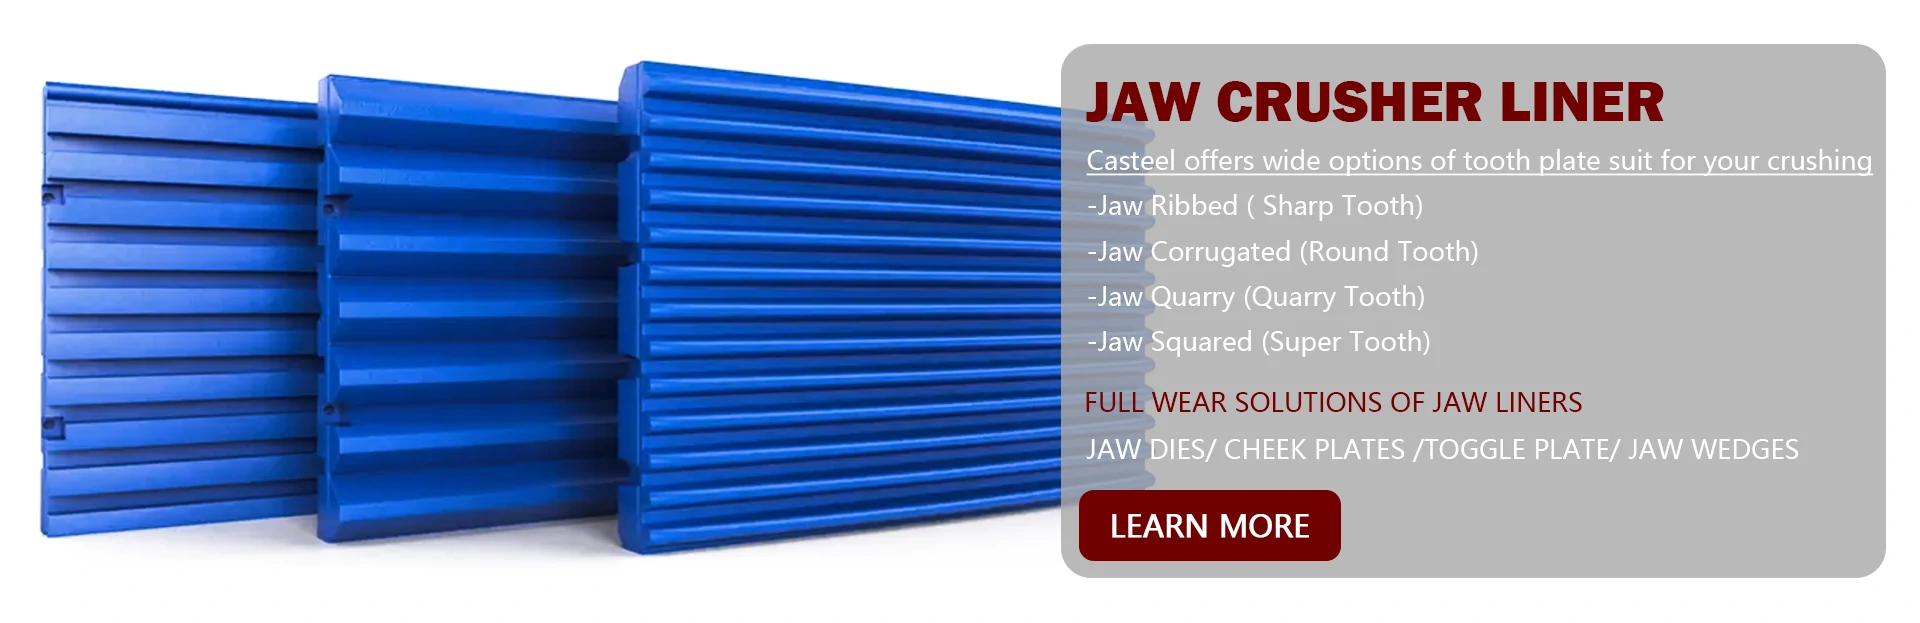 JAW CRUSHER LINER